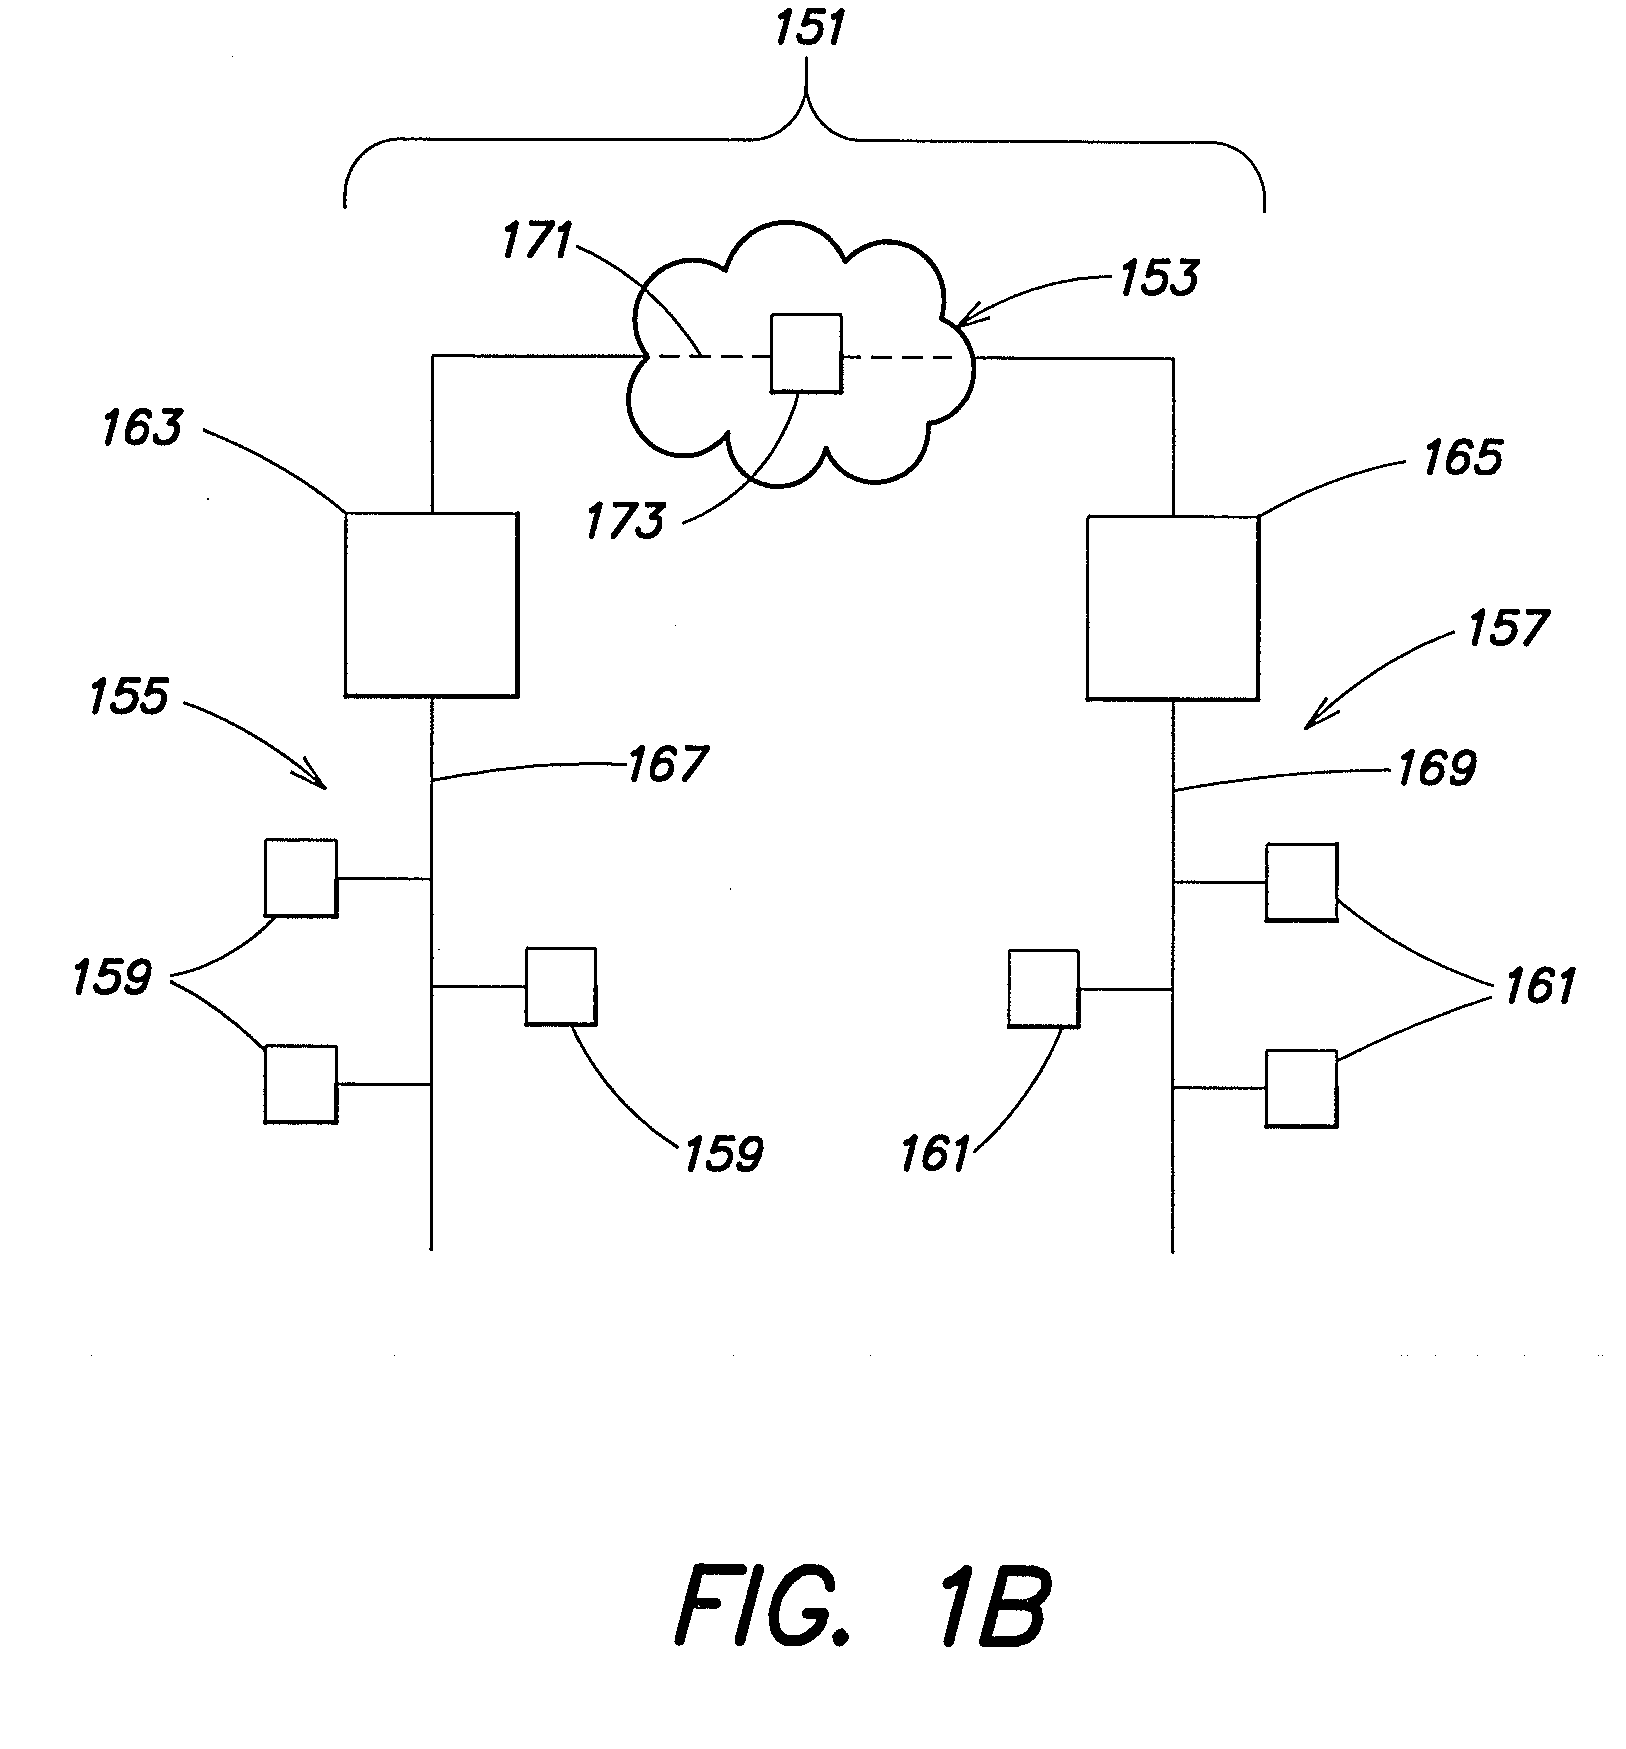 Antenna system for communicating with mobile devices